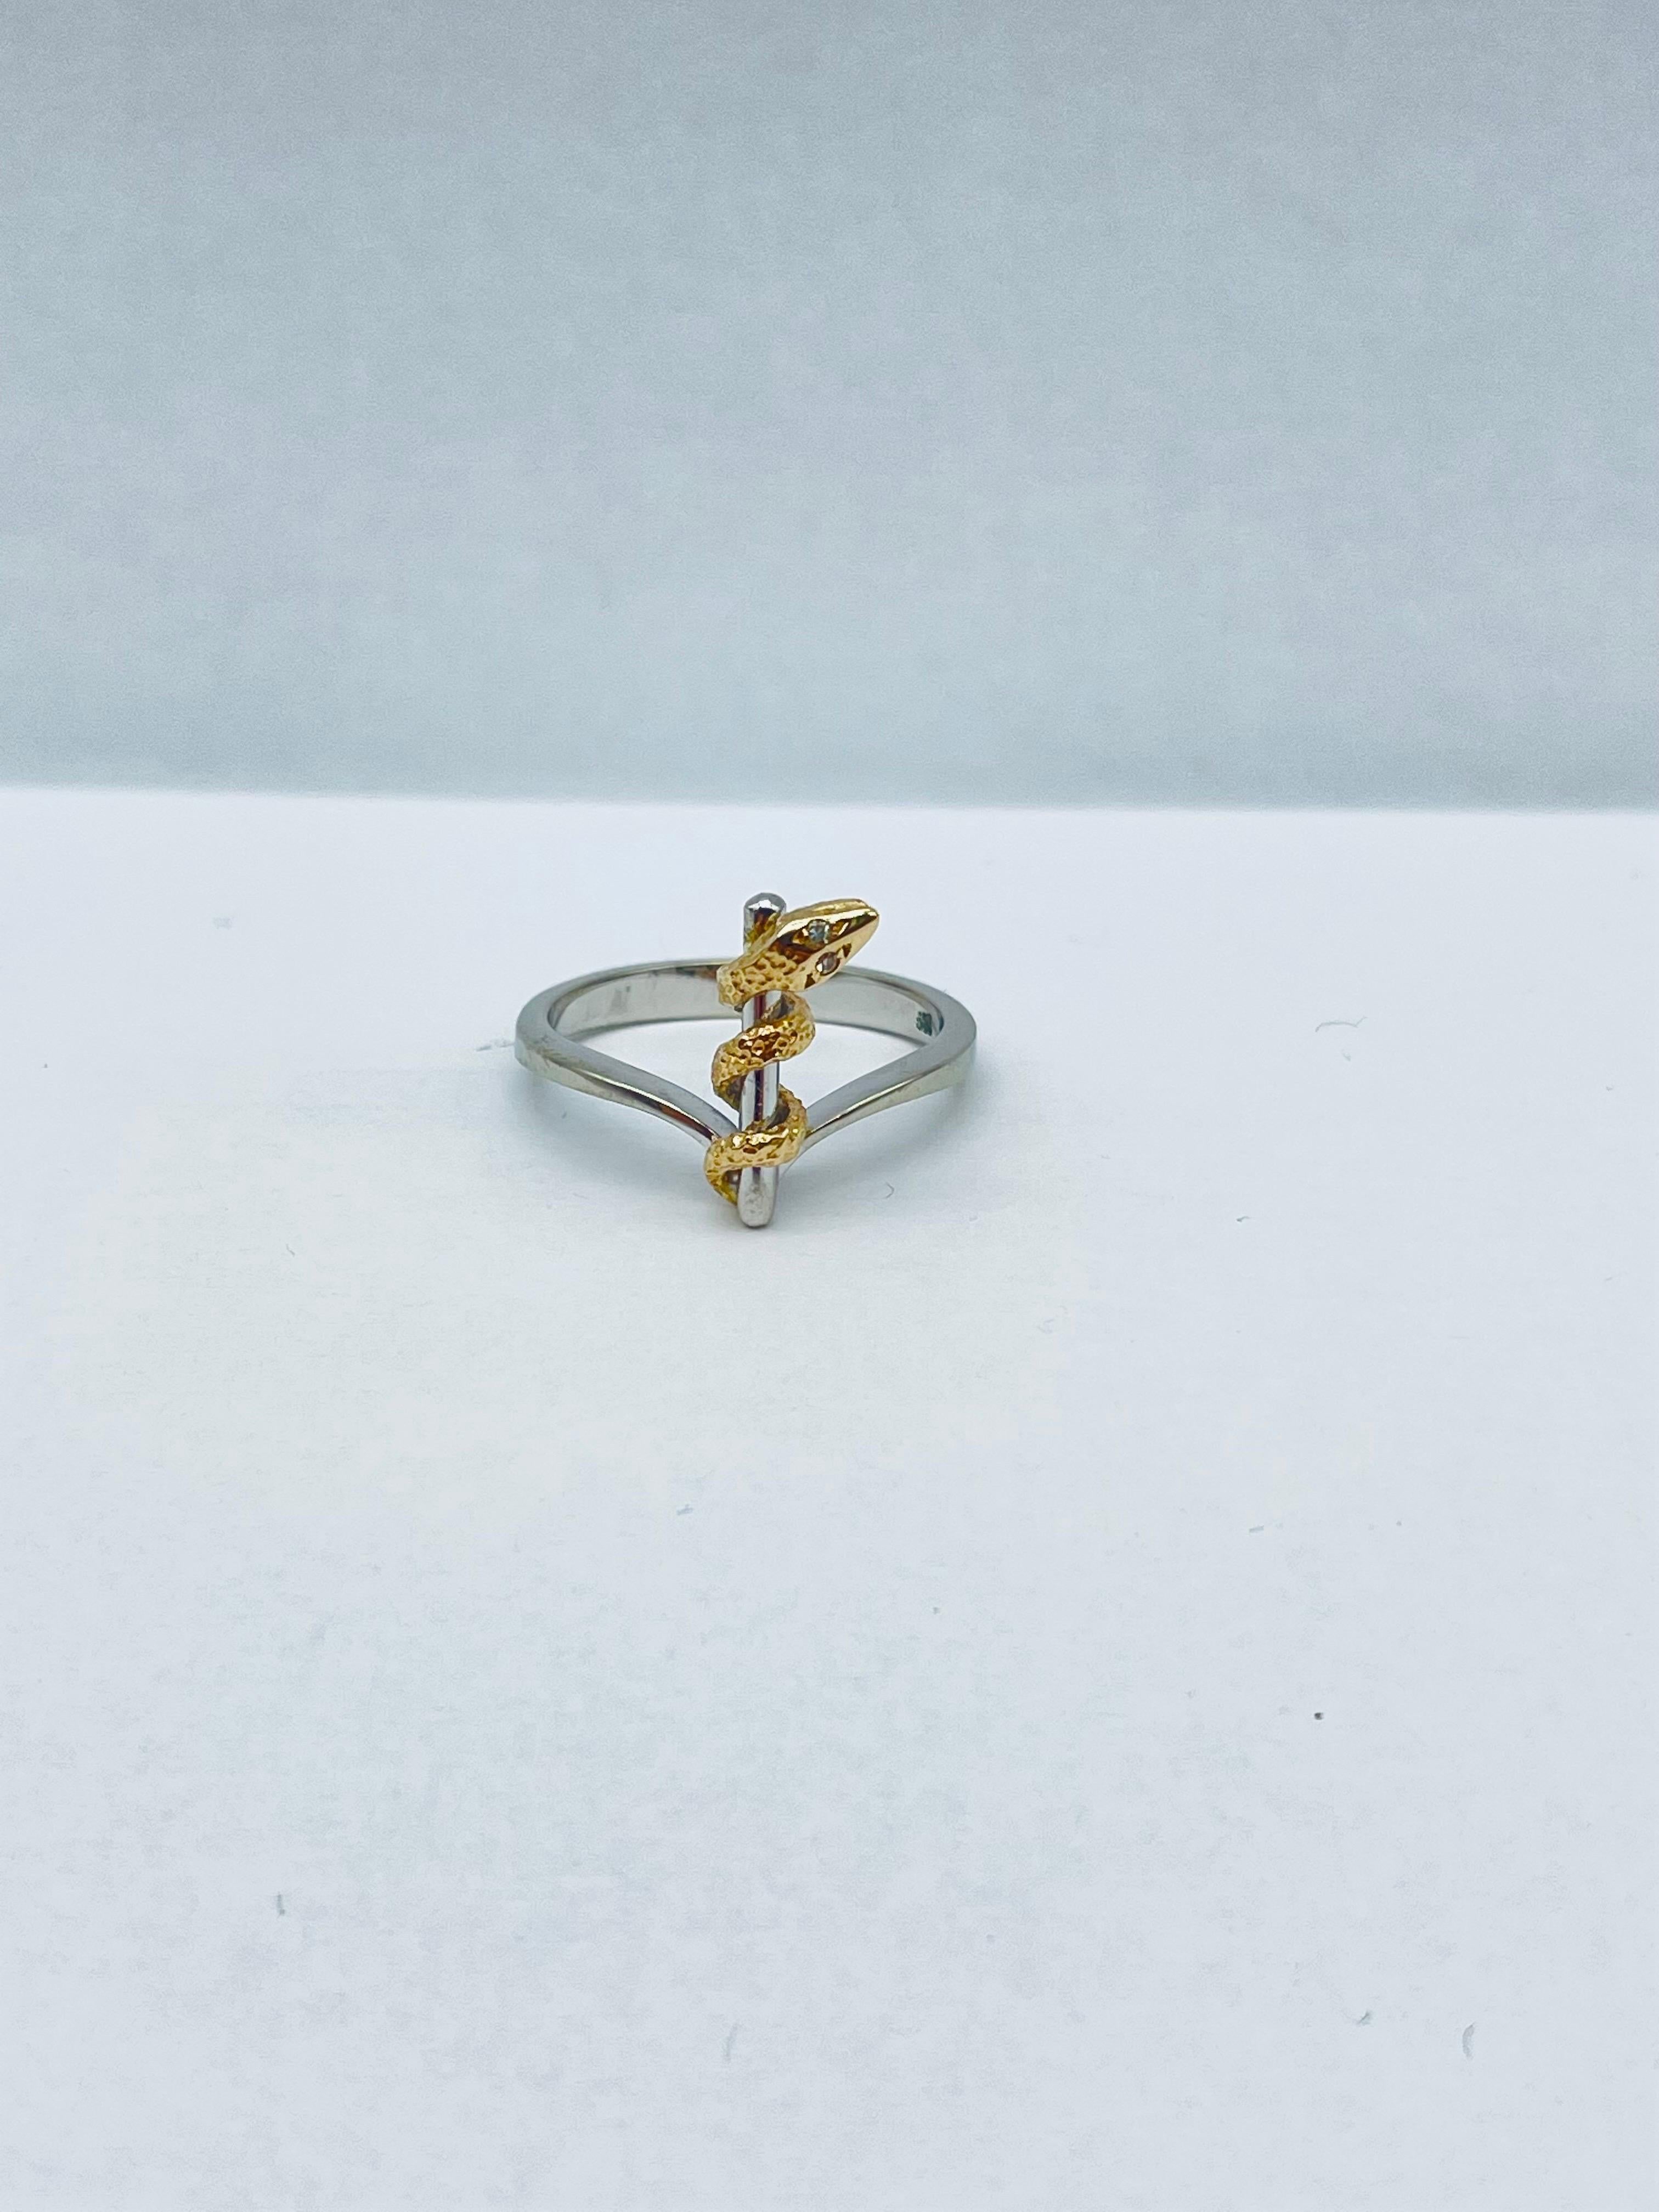 Unique and Elegant Snake Bicolor Ring with Diamond Eyes White/Yellow Gold 14k For Sale 1